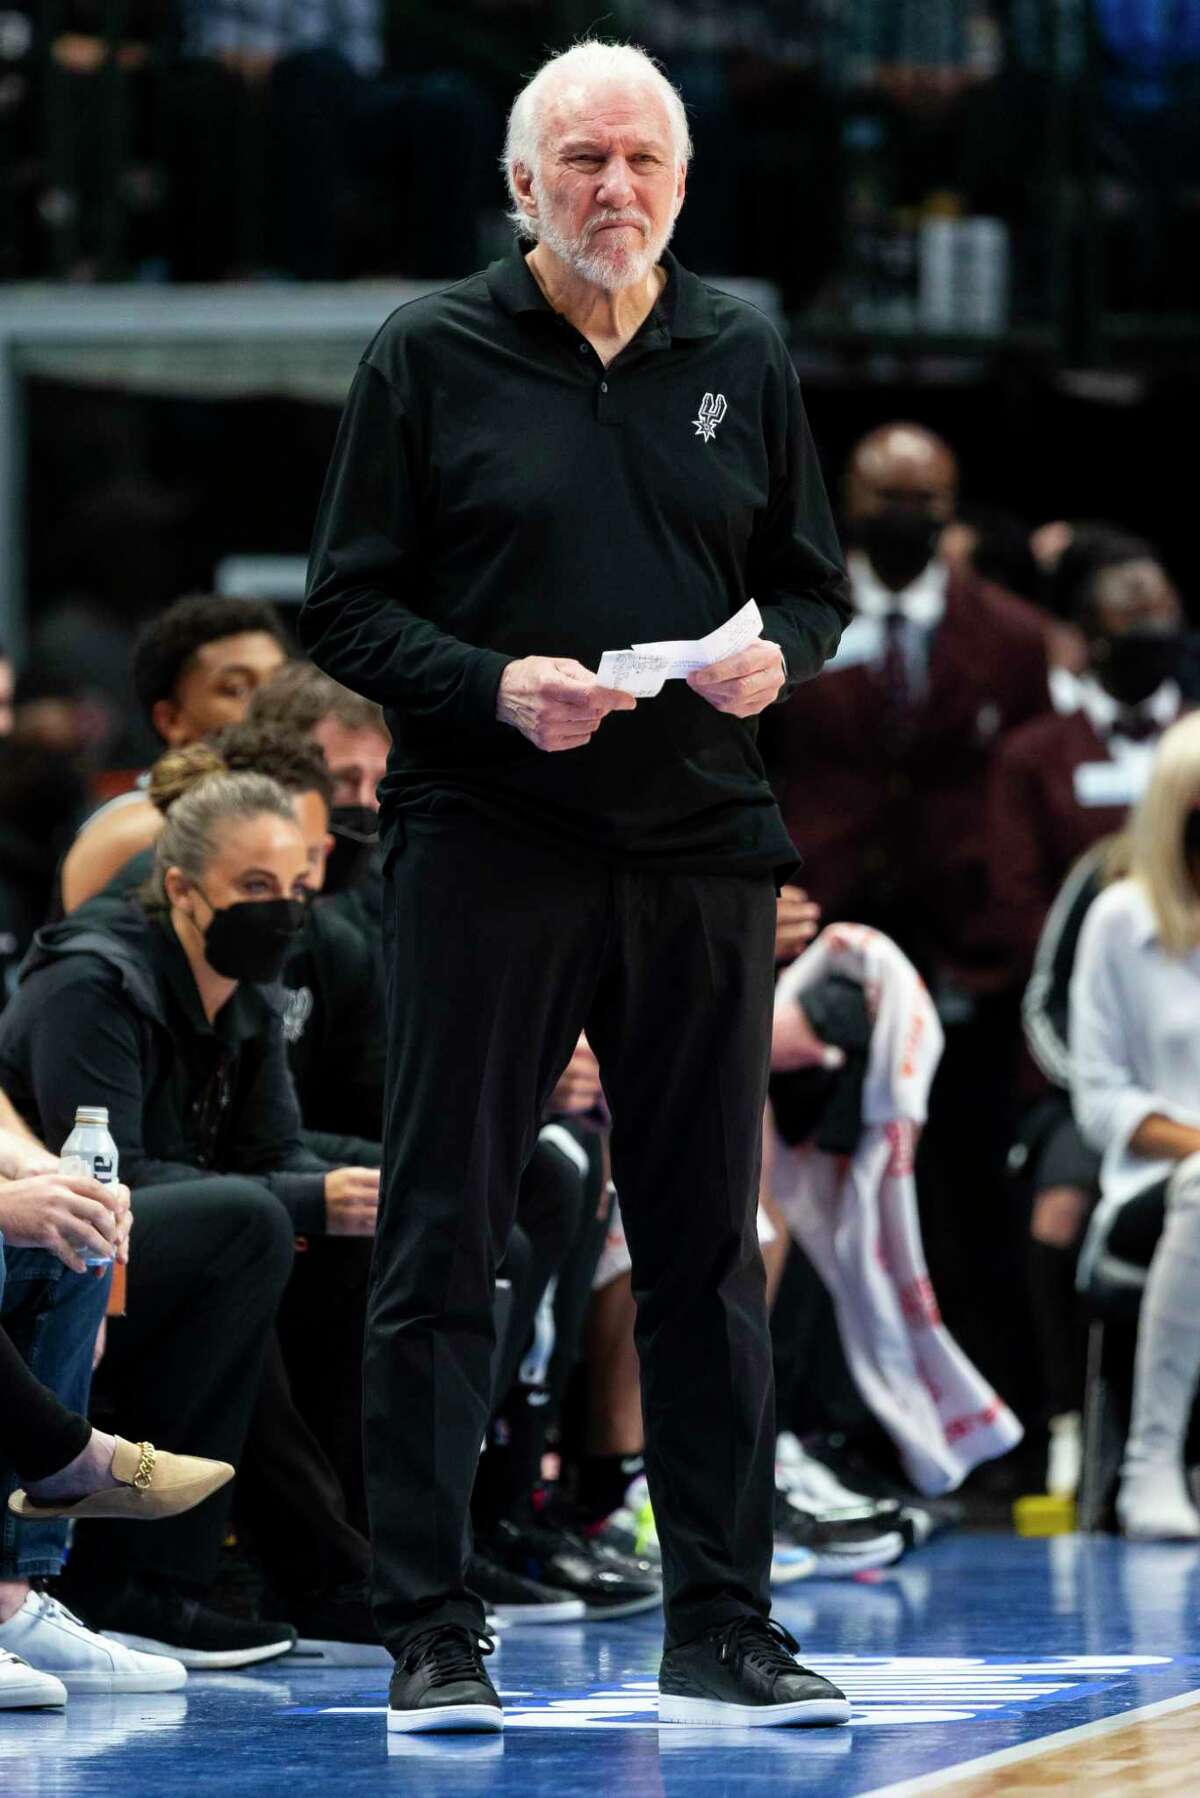 San Antonio Spurs coach Gregg Popovich watches play during the second half of the team's NBA basketball game against the Dallas Mavericks, Thursday, Oct. 28, 2021, in Dallas. (AP Photo/Sam Hodde)